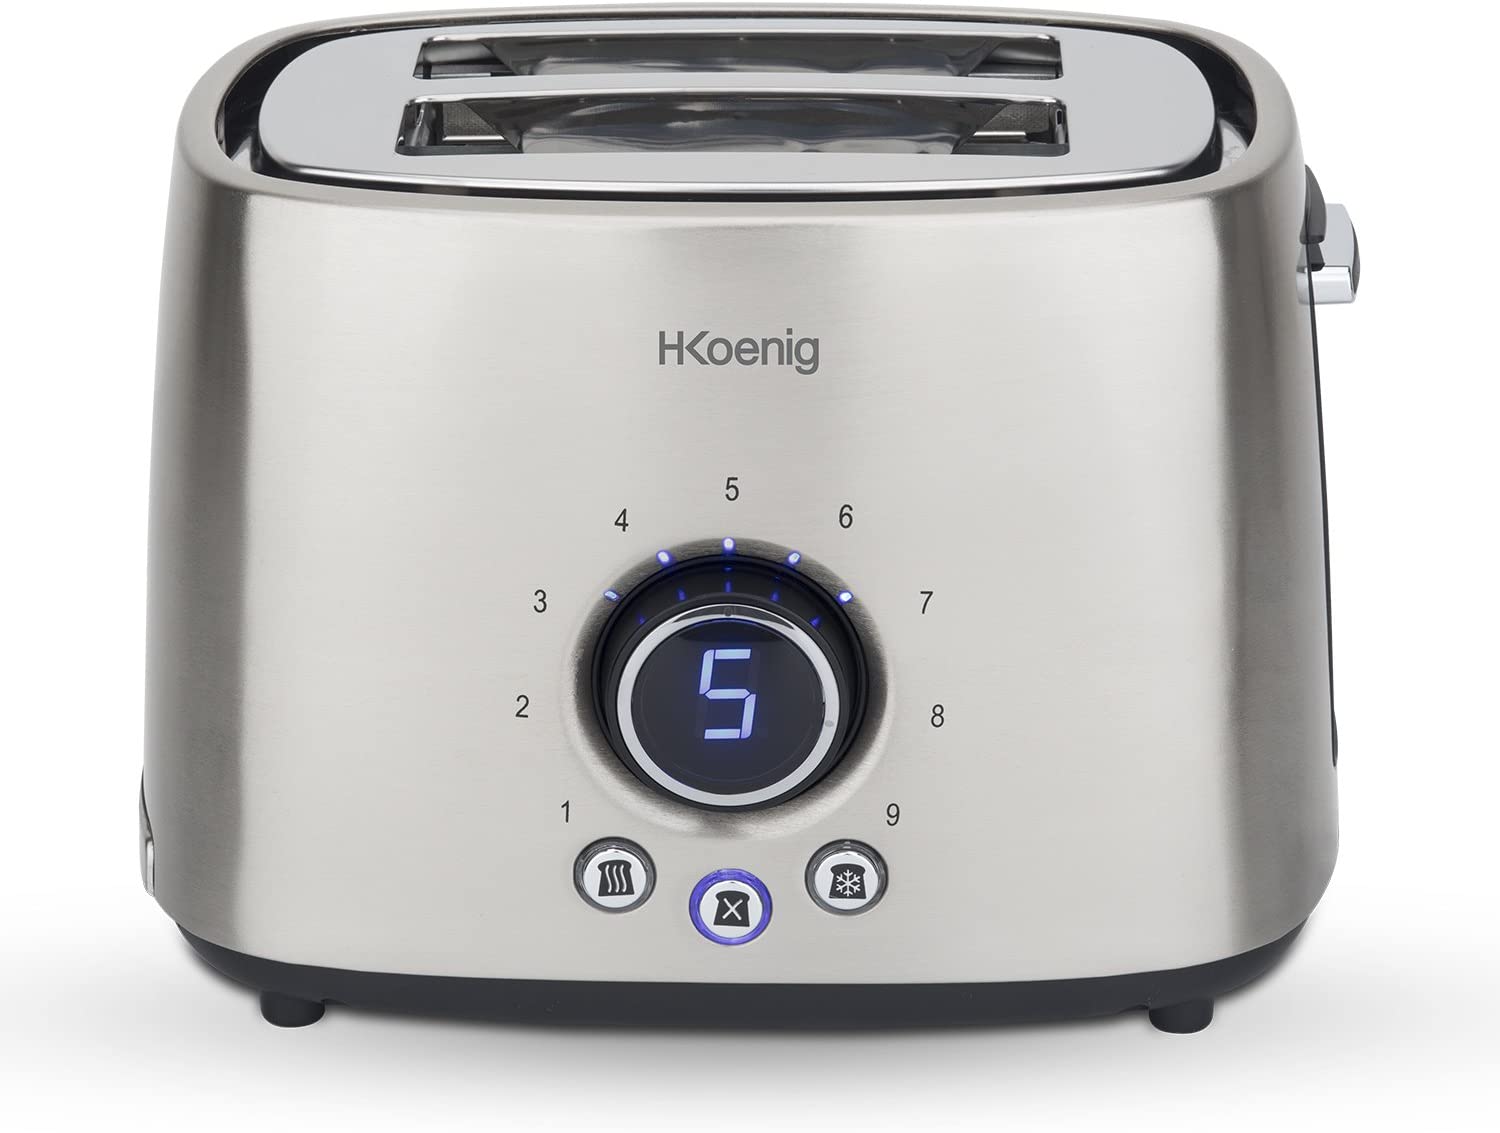 H.Koenig TOS8 Toaster / 2 Slices / 9 Browning Levels / Light Indicator with Remaining Time / 1000 W / Stainless Steel / Silver